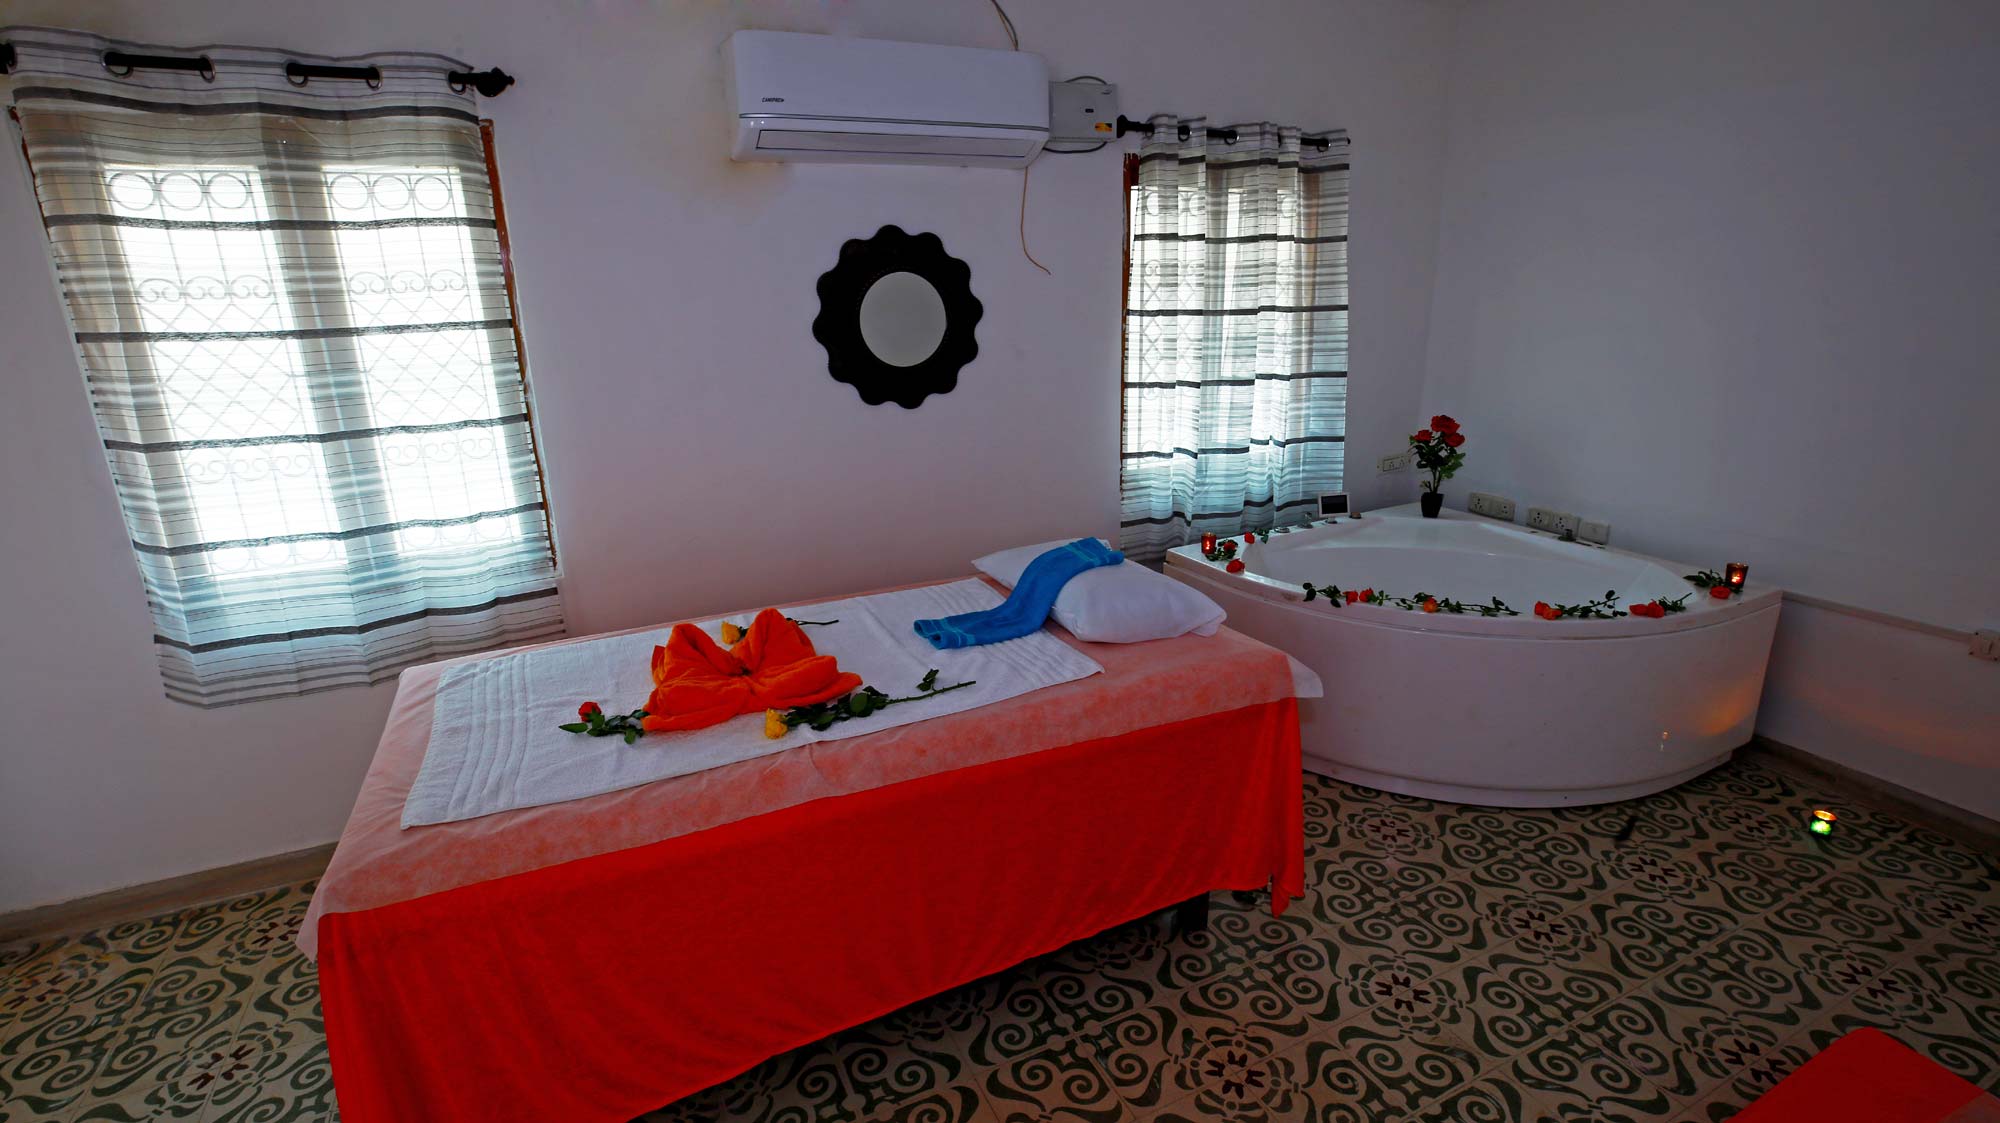 A room in a massage spa features bath tub, massage table with pillow, towel and flowers laid down, Air Conditioner, two windows with curtains and a mirror.